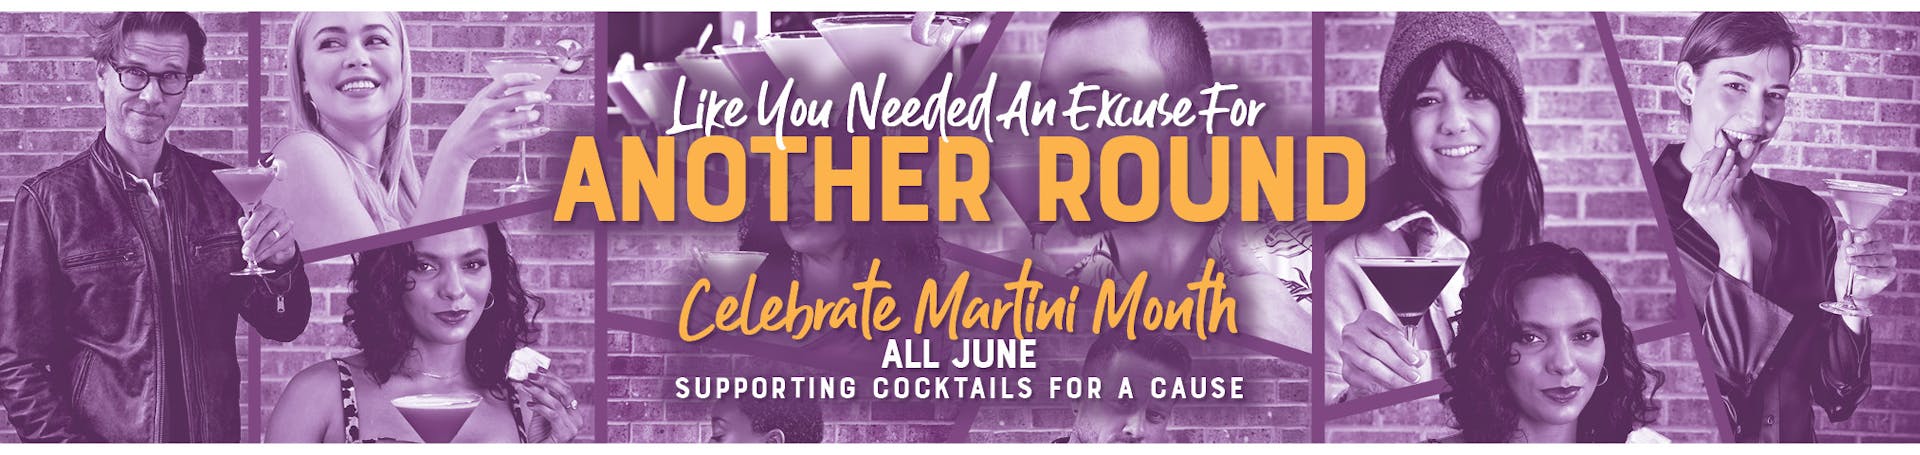 Image of several people holding martinis. Like you needed an excuse for Another Round. Celebrate Martini Month All June - Supporting cocktails for a cause..